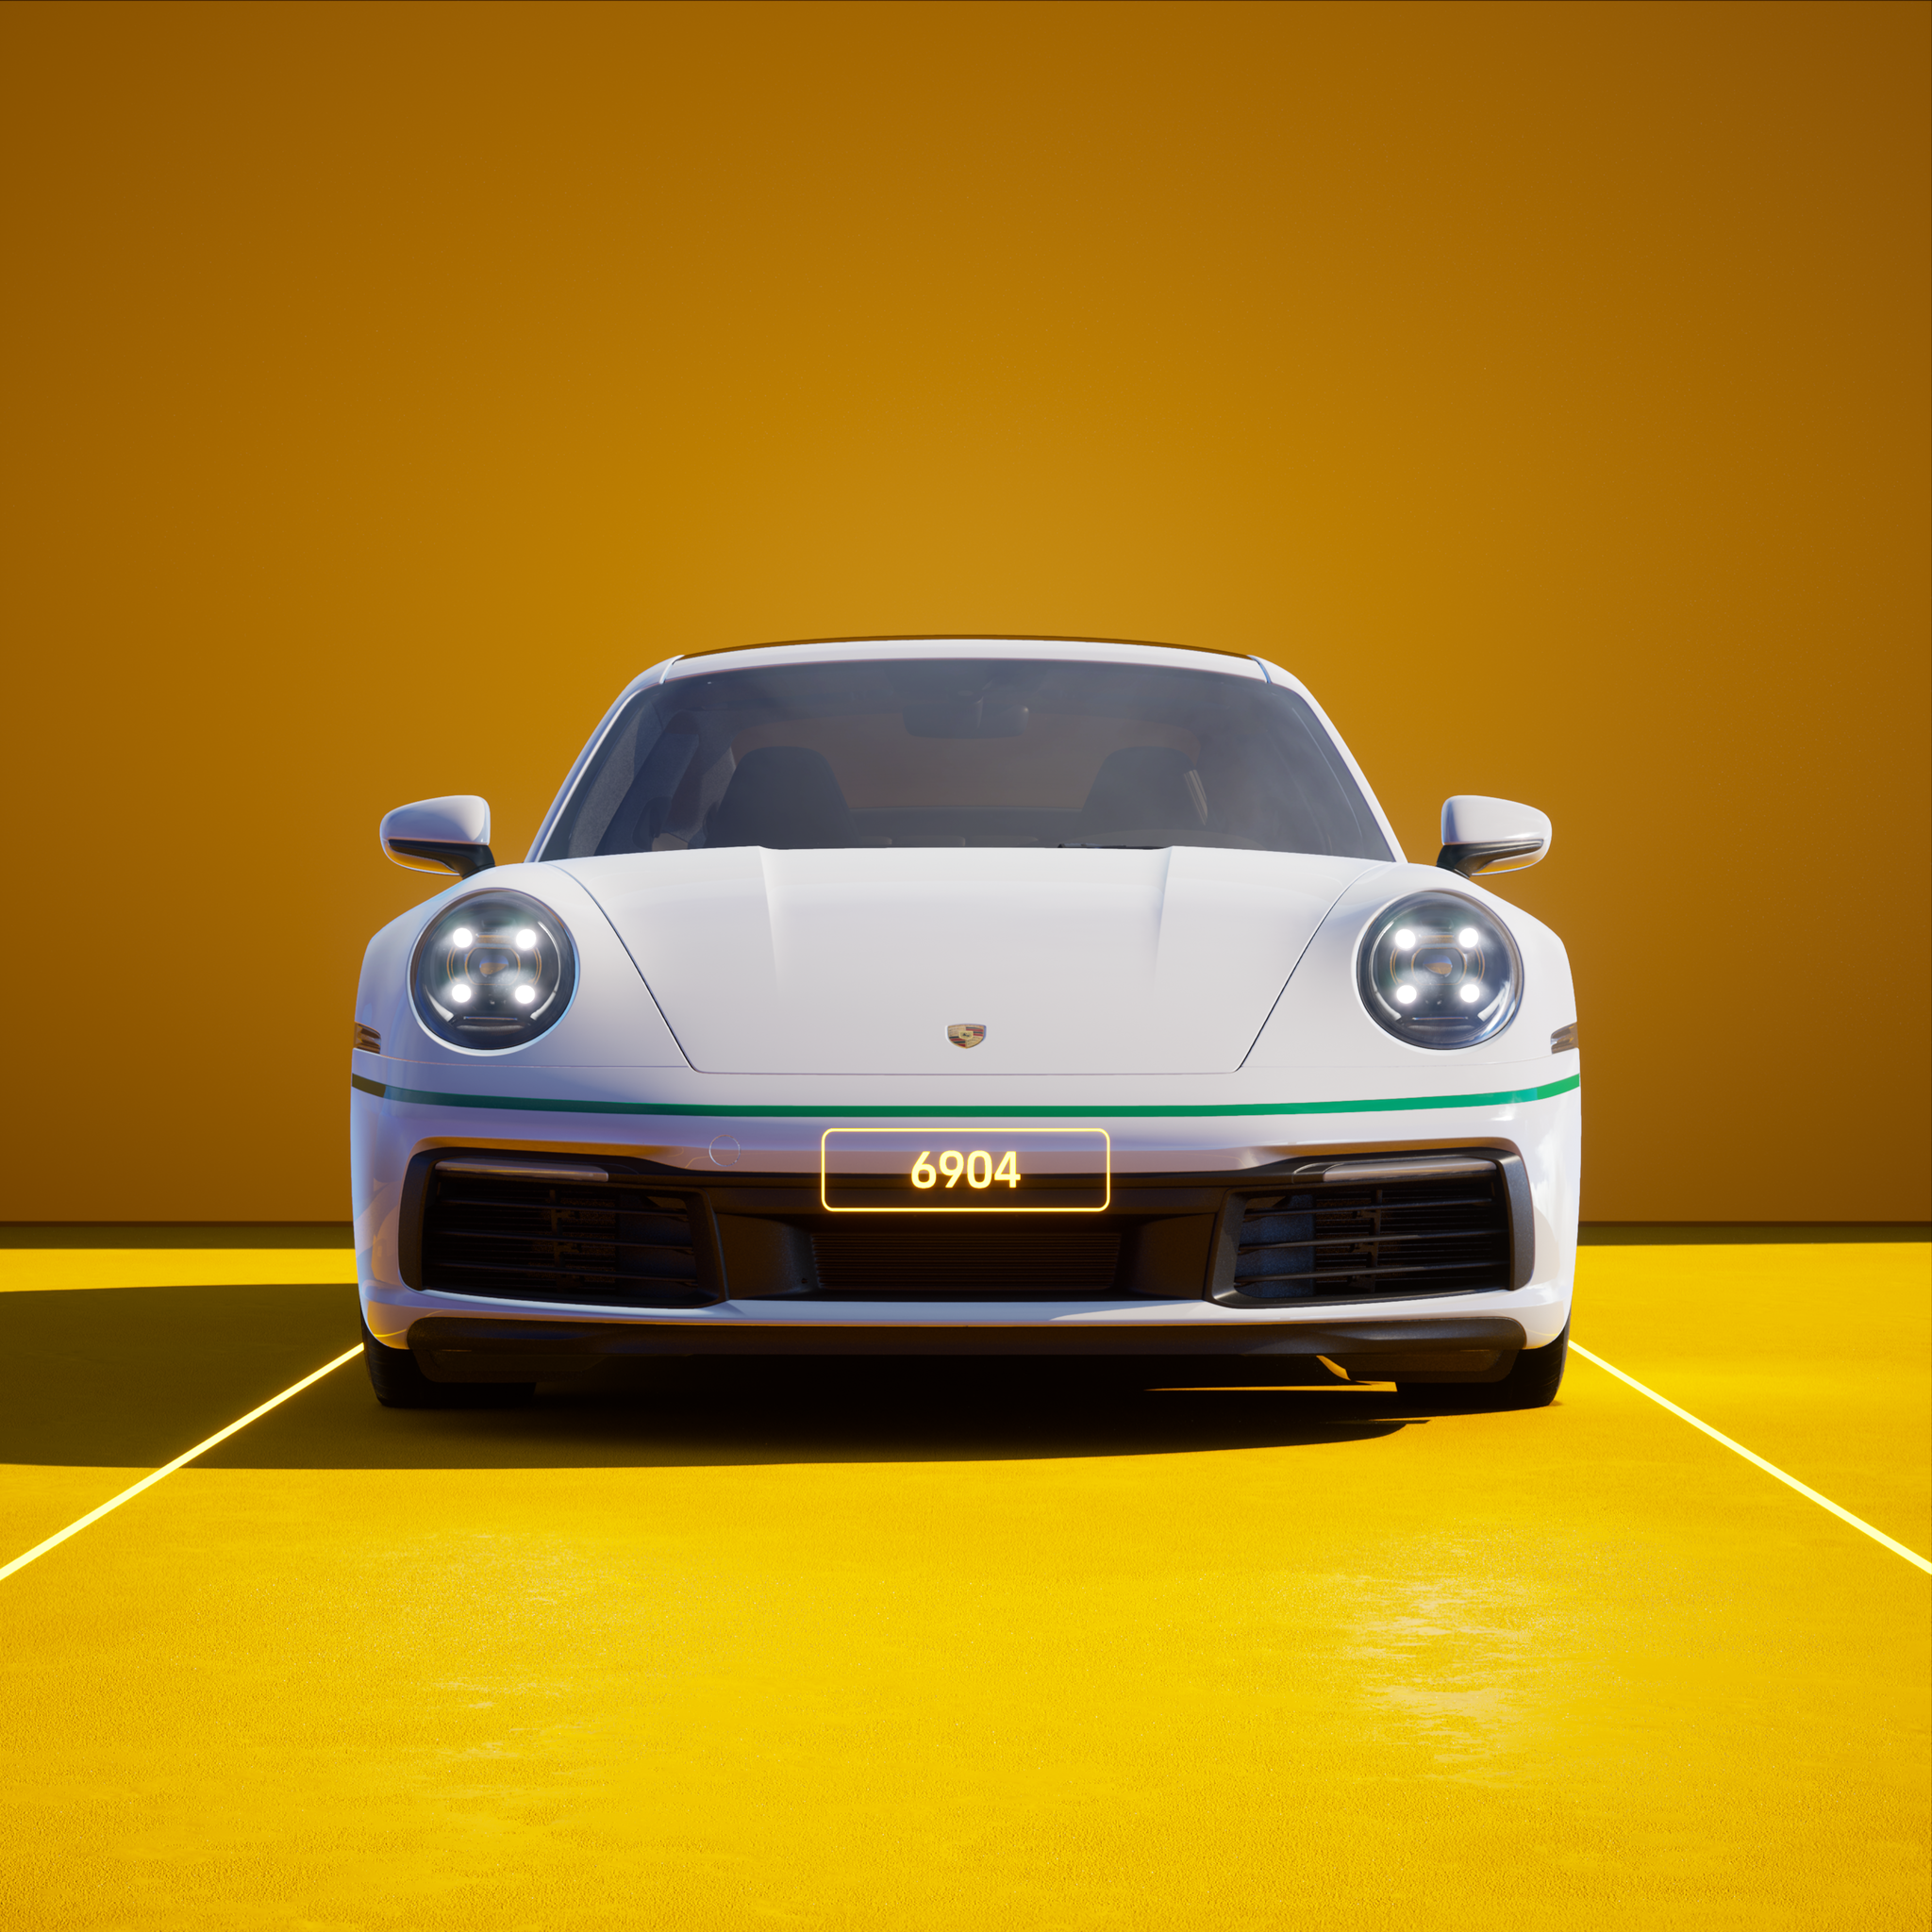 The PORSCHΞ 911 6904 image in phase